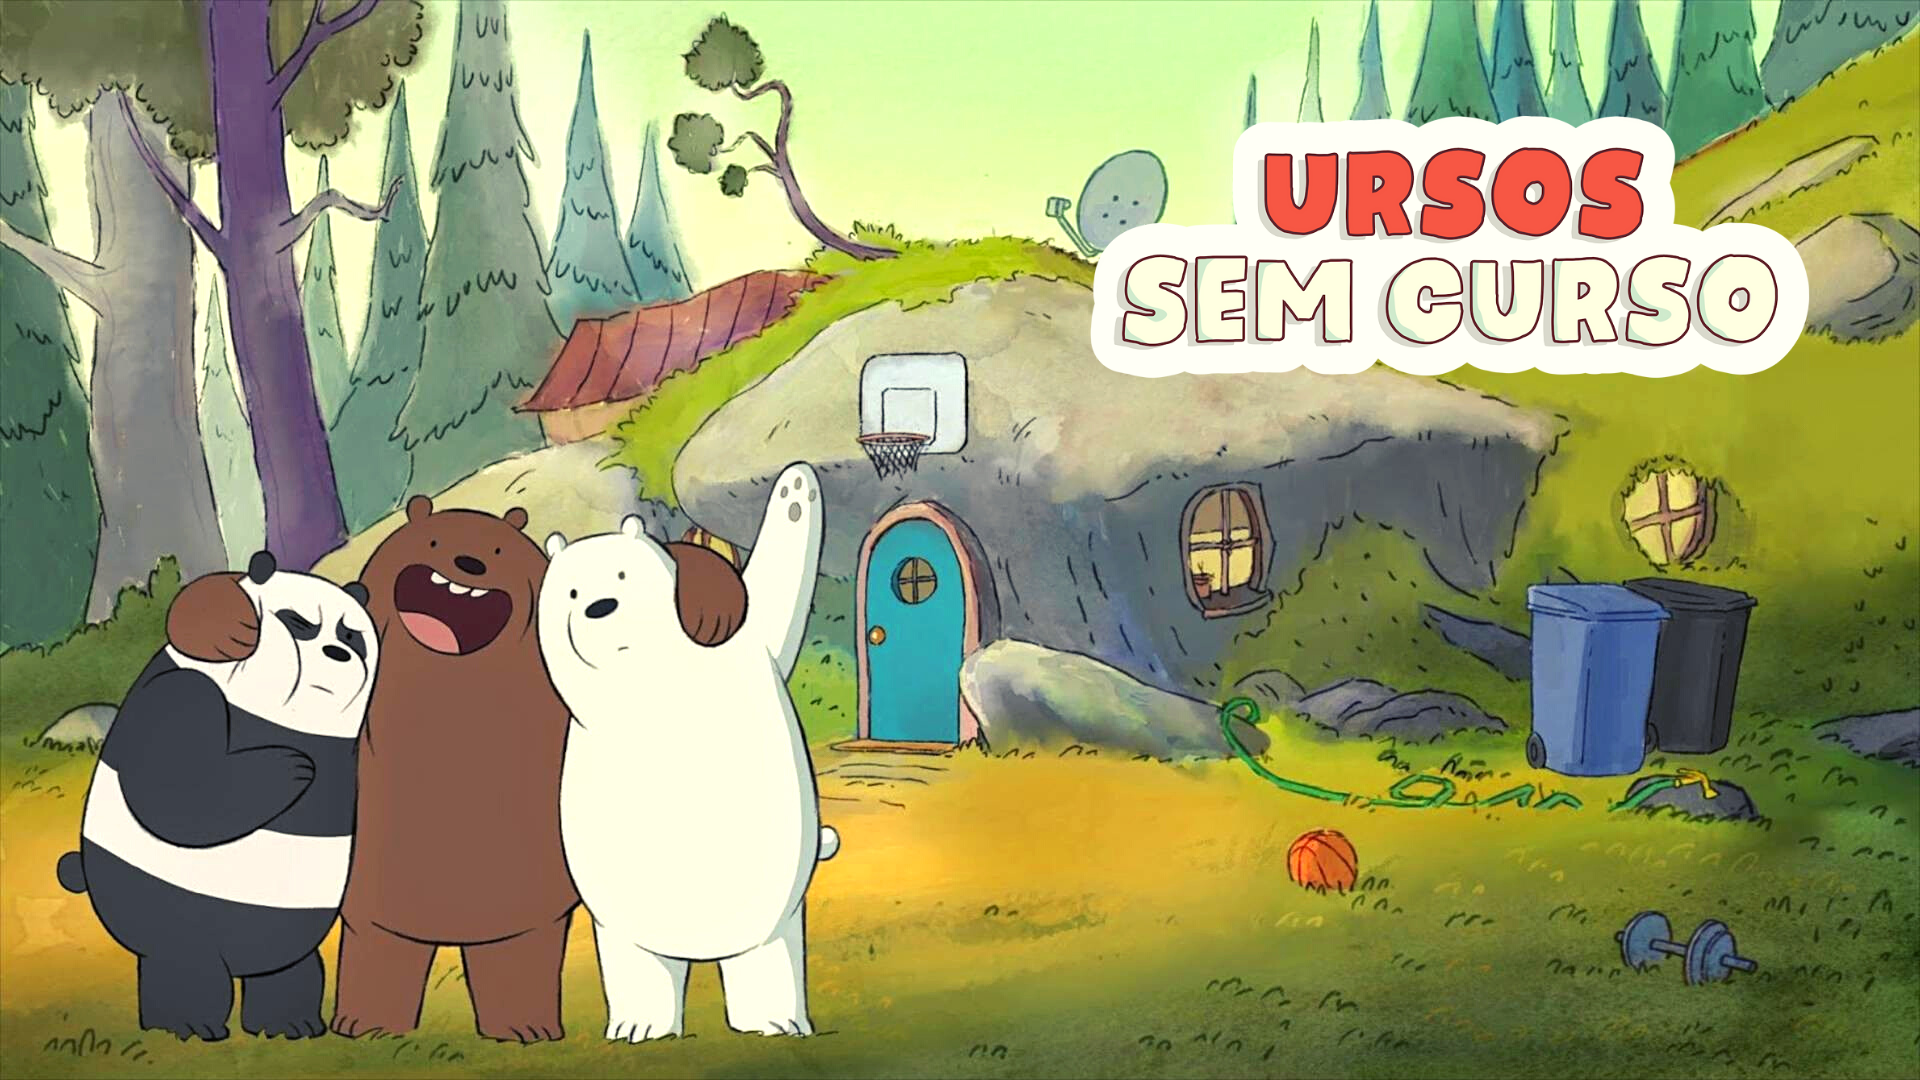 TV Show We Bare Bears HD Wallpaper | Background Image